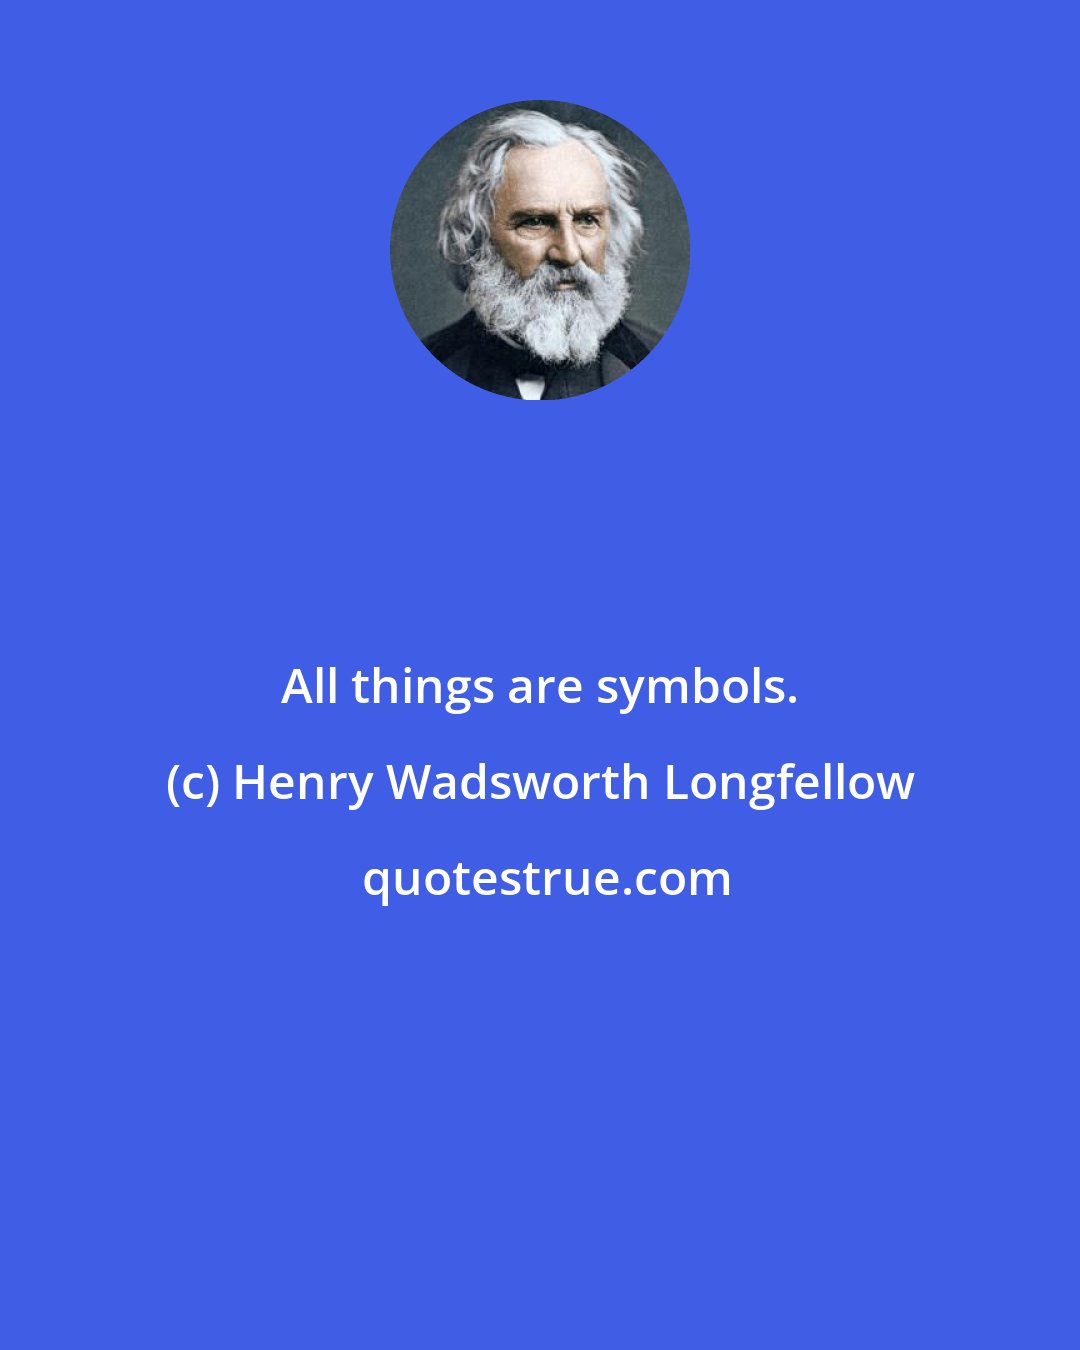 Henry Wadsworth Longfellow: All things are symbols.